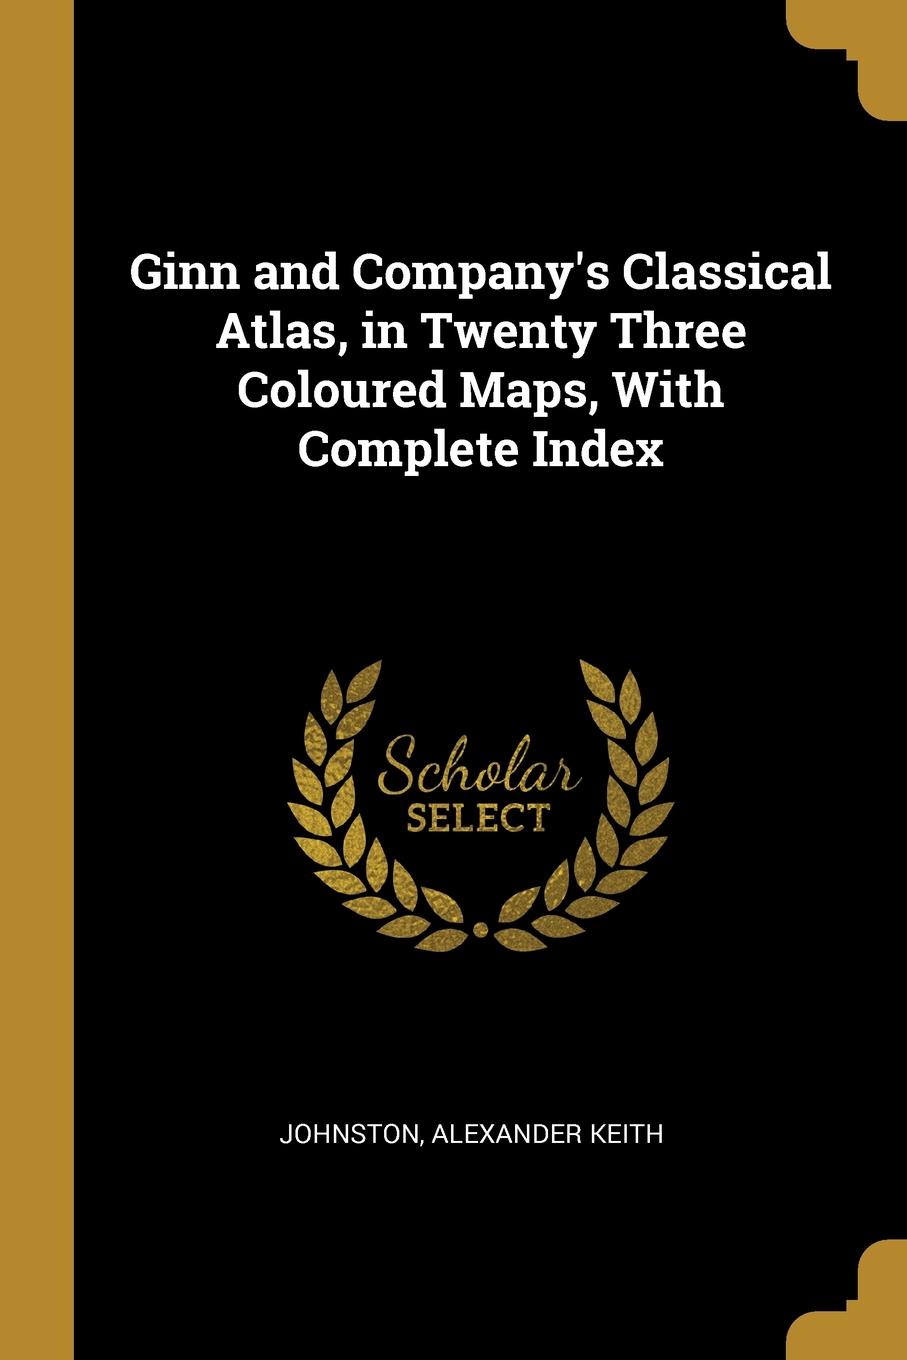 Ginn and Company.s Classical Atlas, in Twenty Three Coloured Maps, With Complete Index